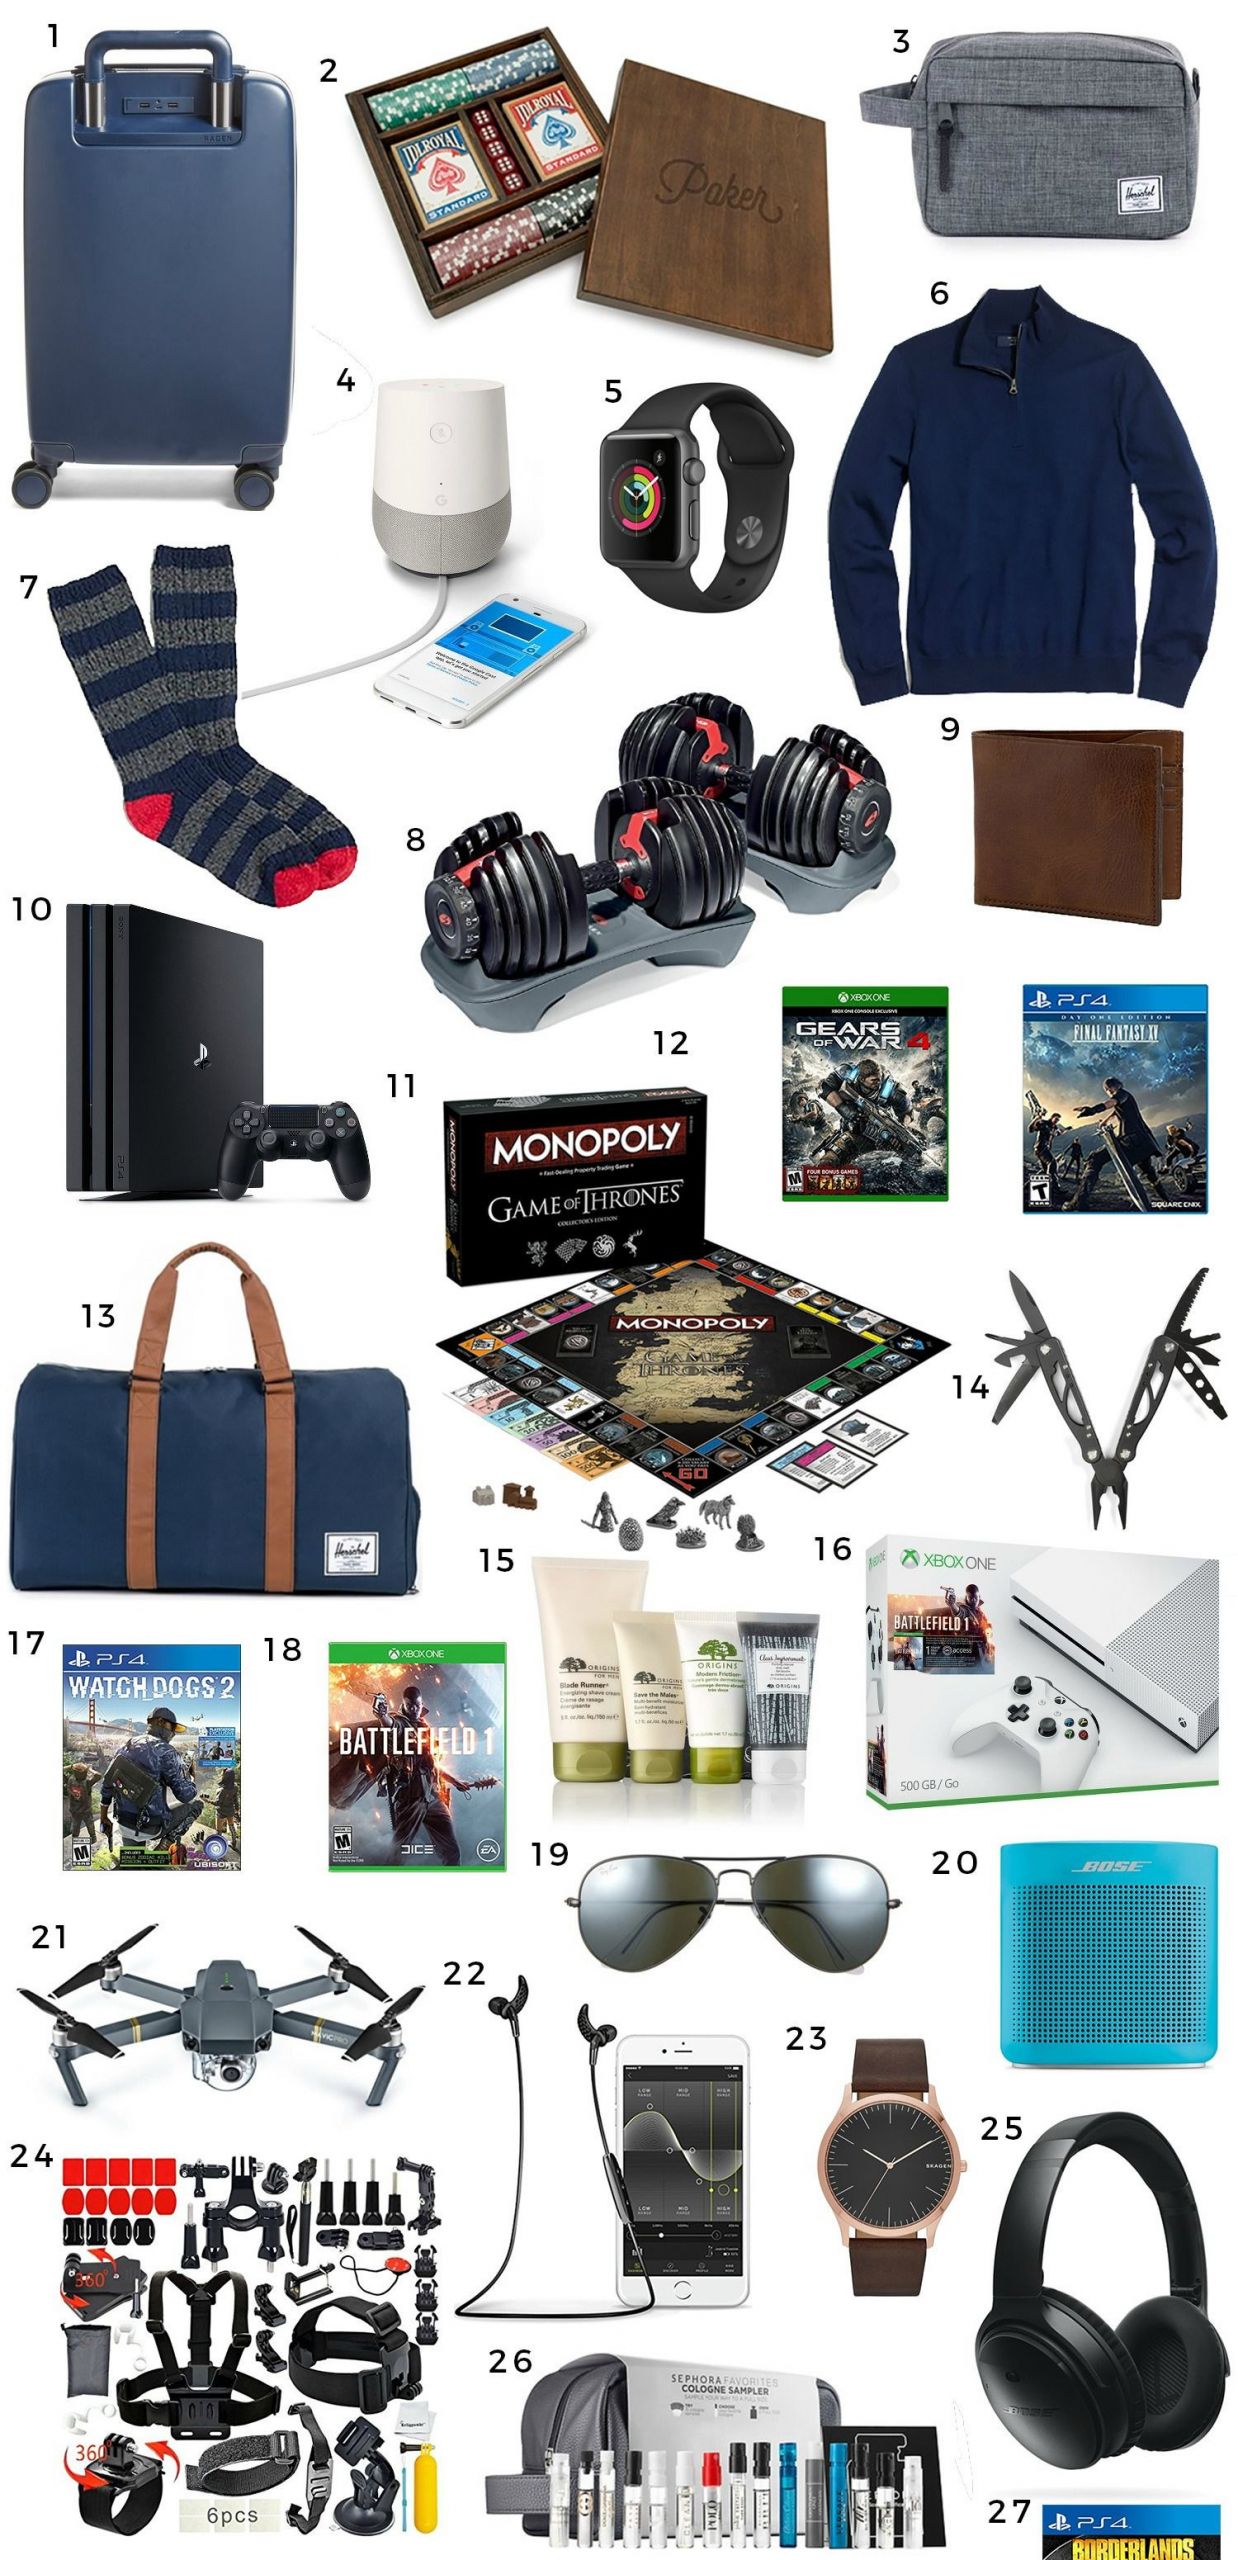 Holiday Gift Ideas For Men
 The Best Christmas Gift Ideas for Men Gifts